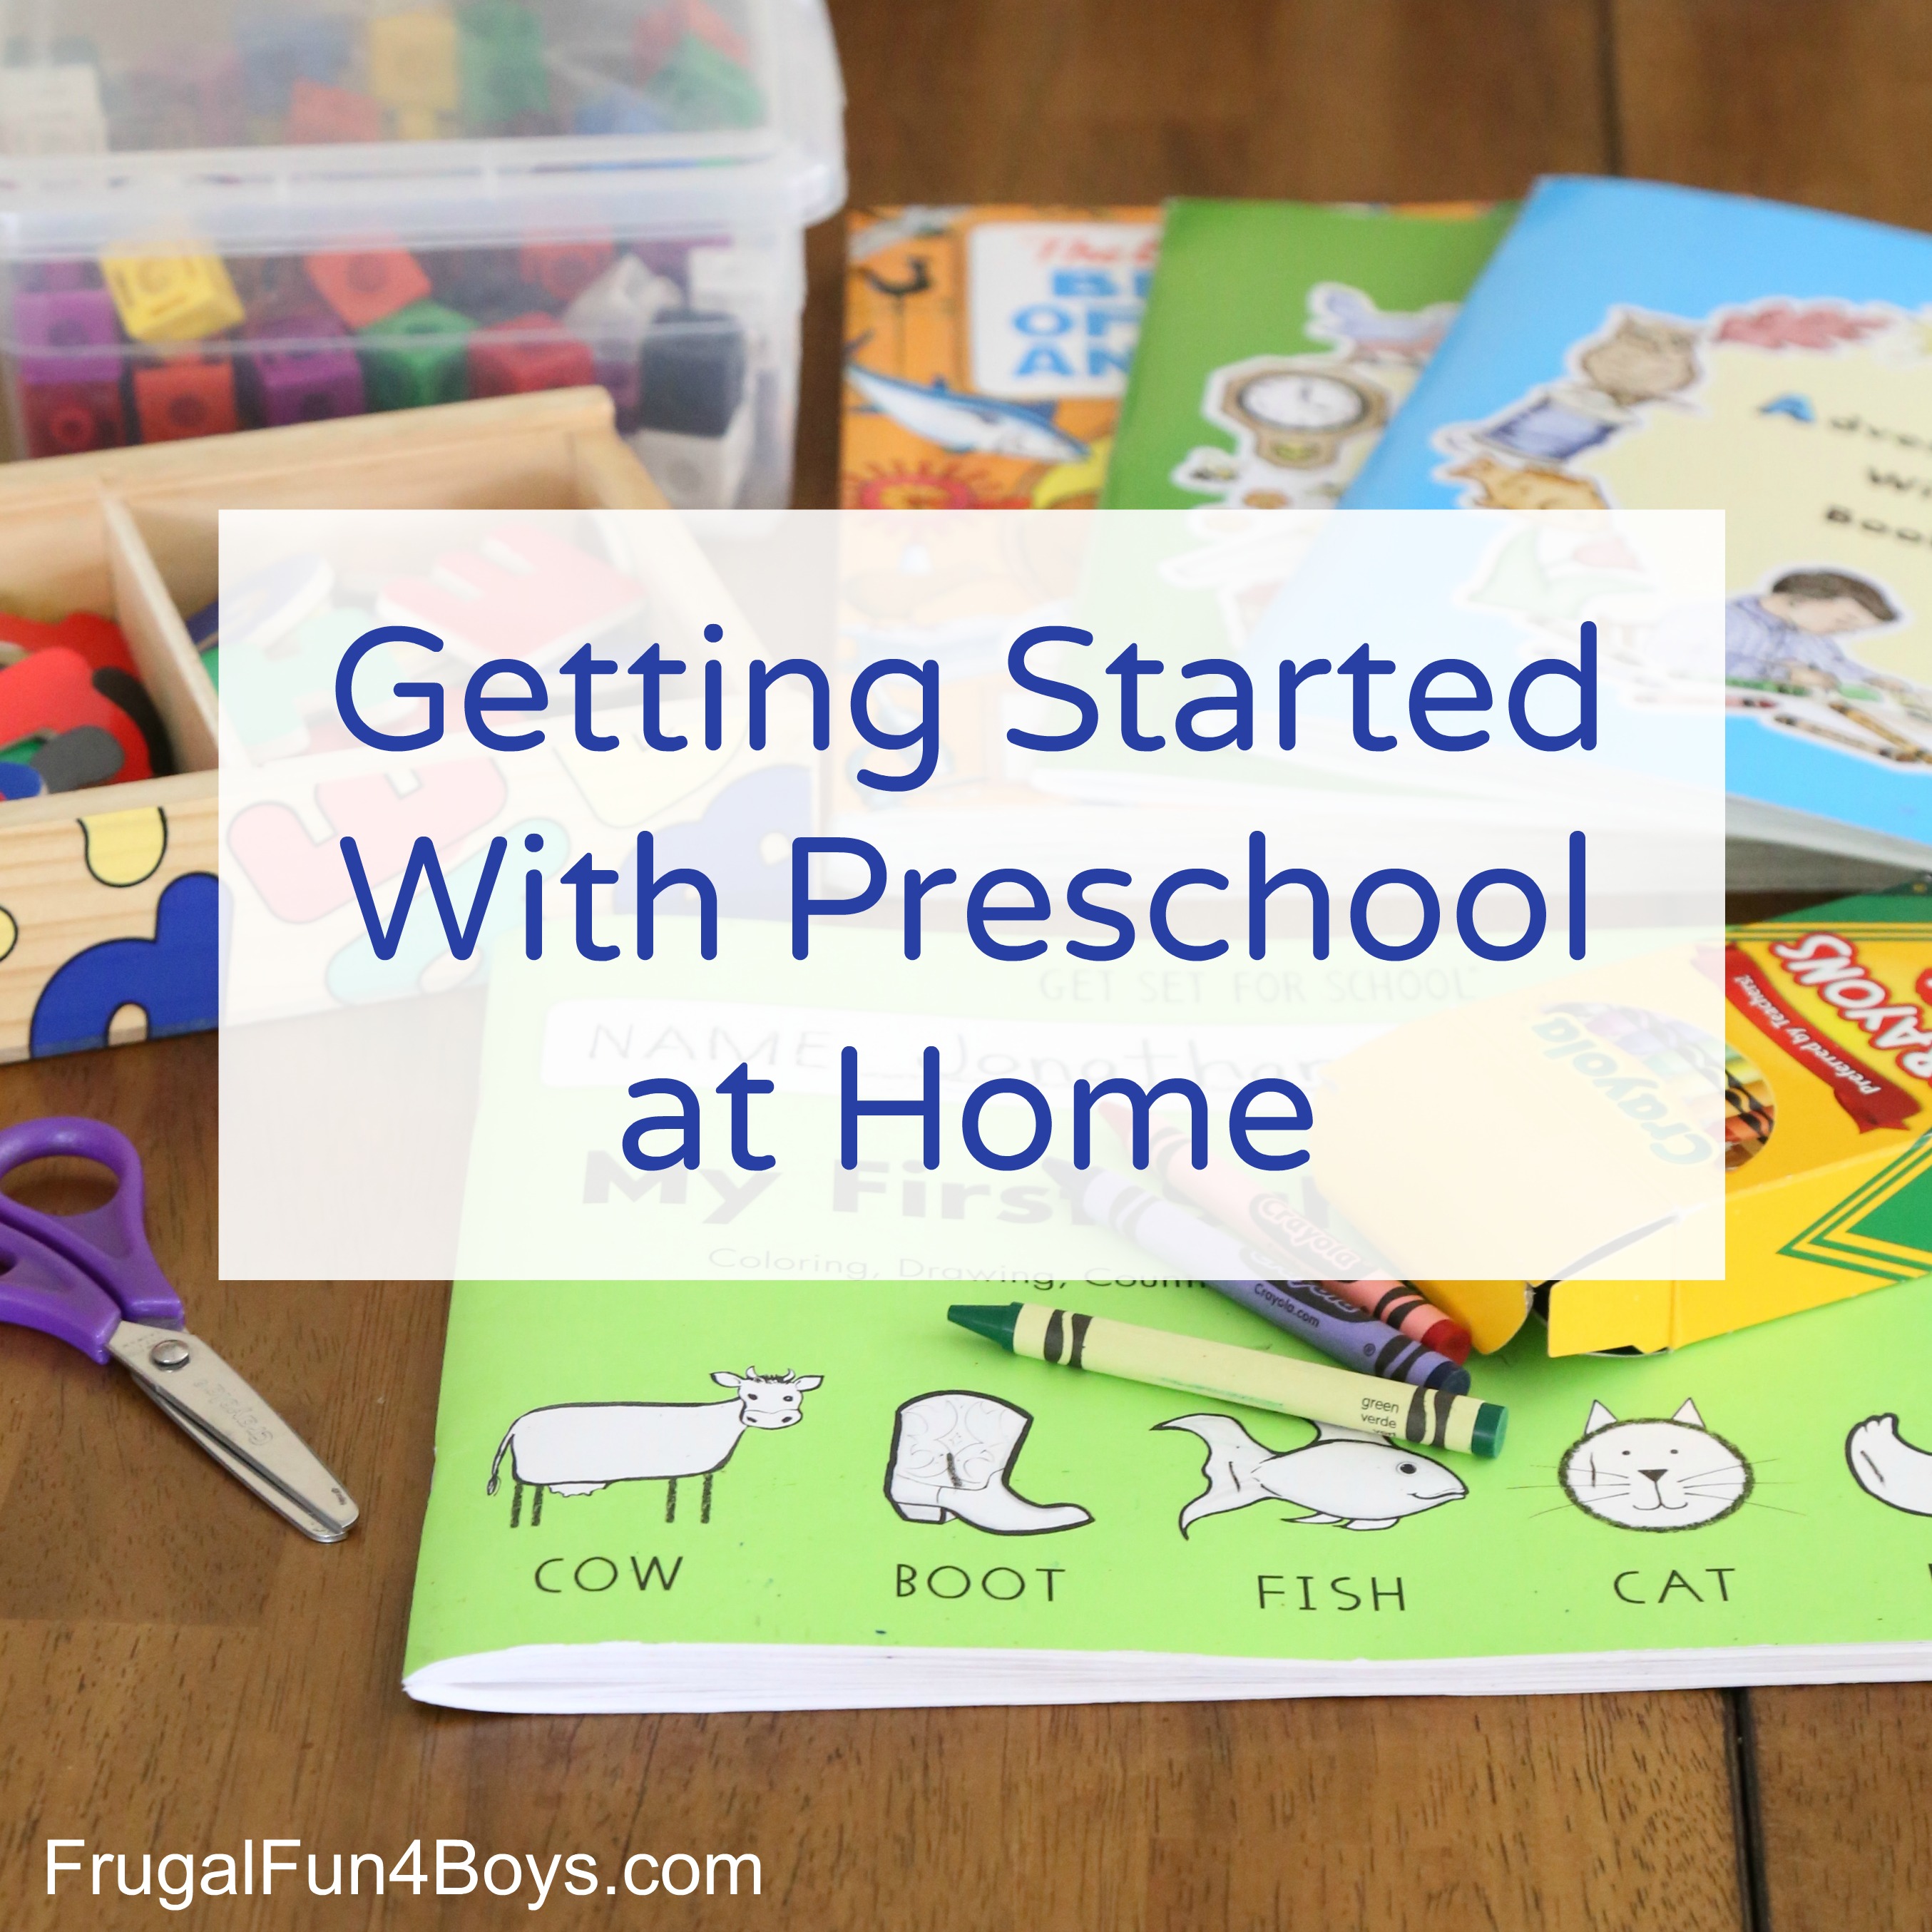 Getting Started with Preschool at Home